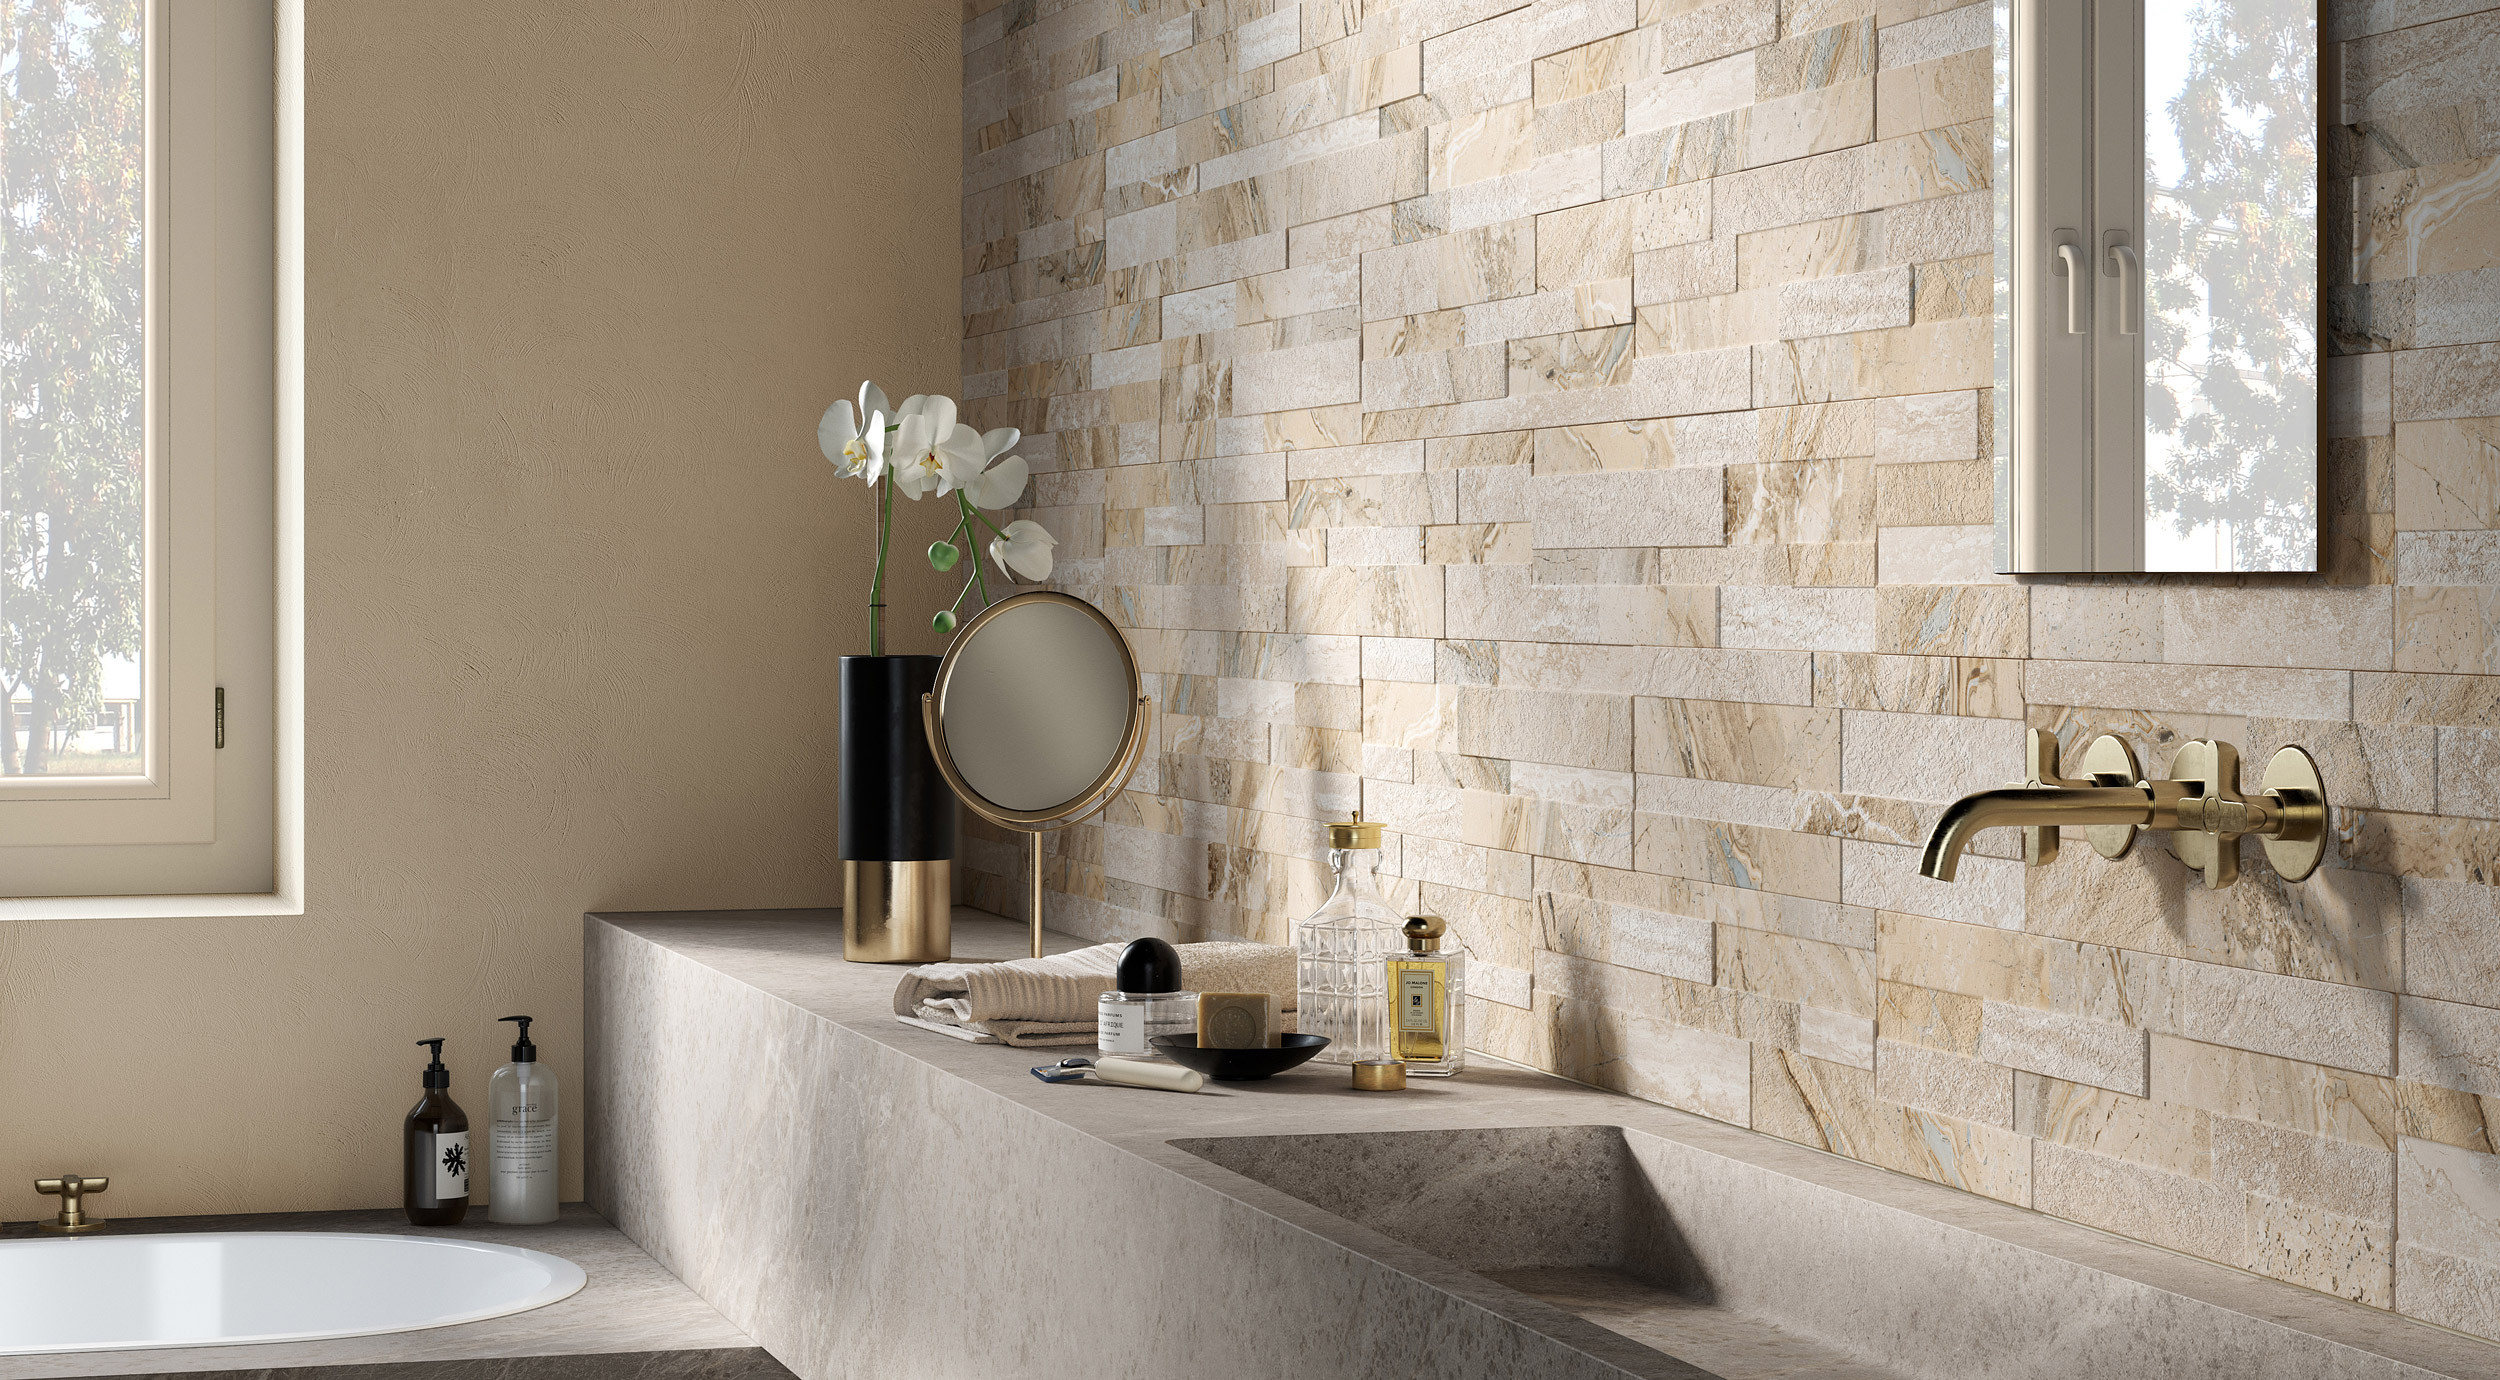 Beige 3D Wall Effect Cladding Gioia series by Ceramica Rondine
